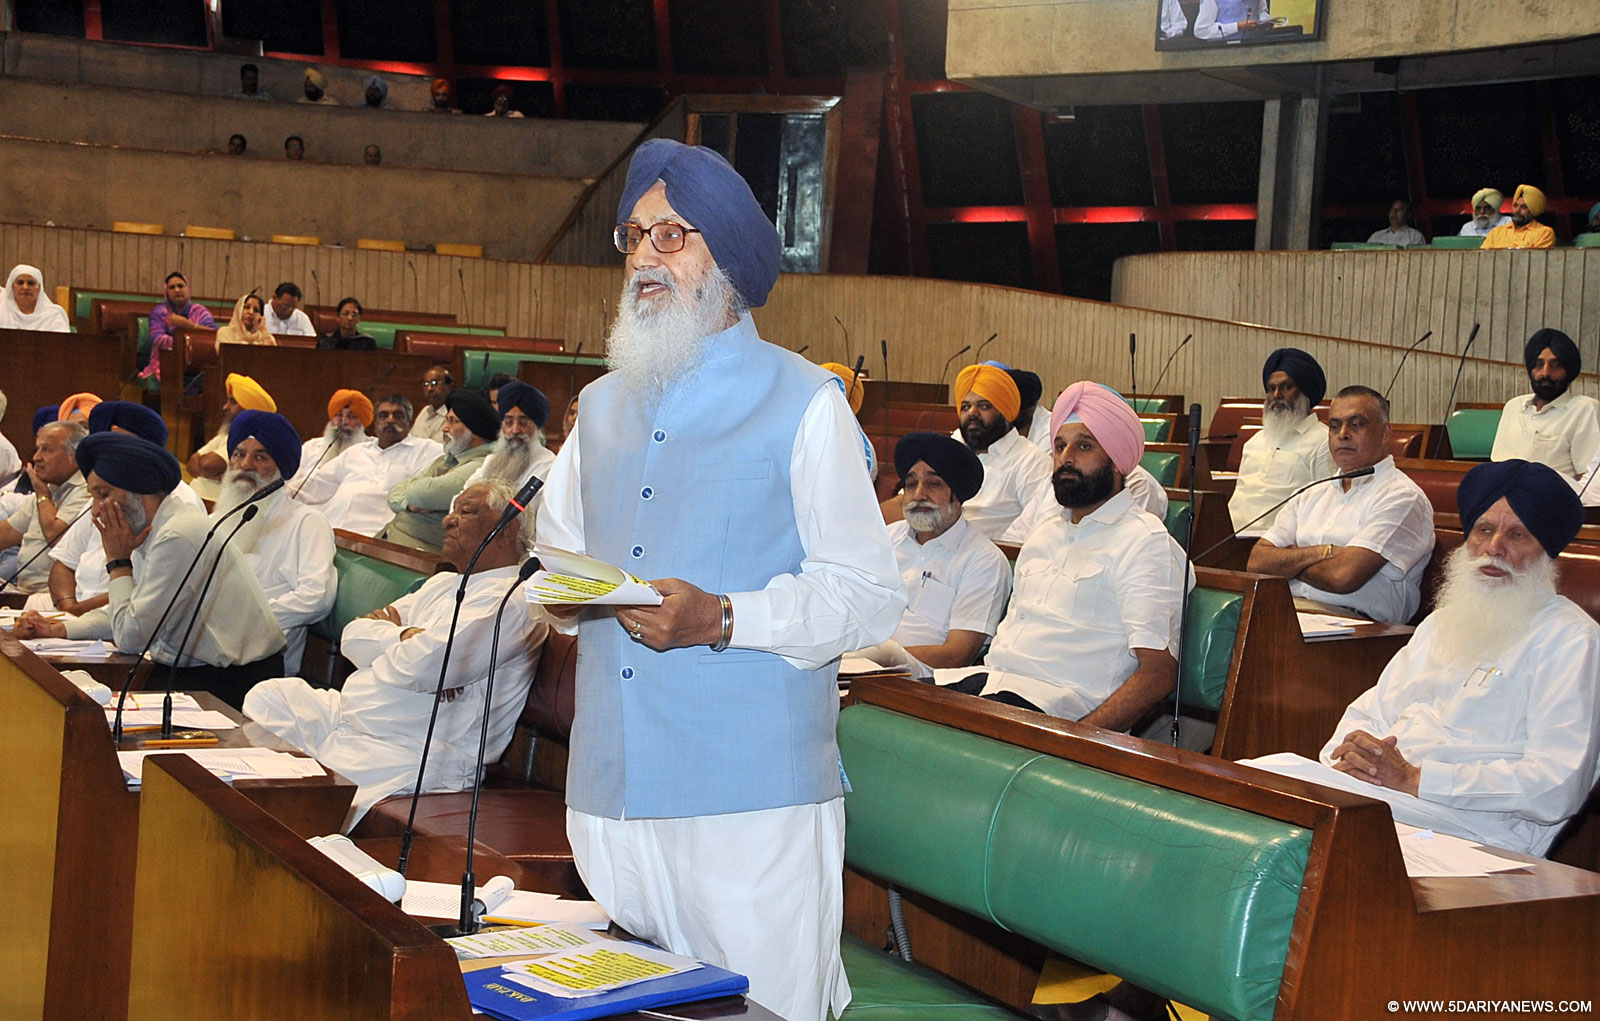 Anyone Found Guilty Of Supplying Spurious Pesticides Would Not Be Spared- Parkash Singh Badal